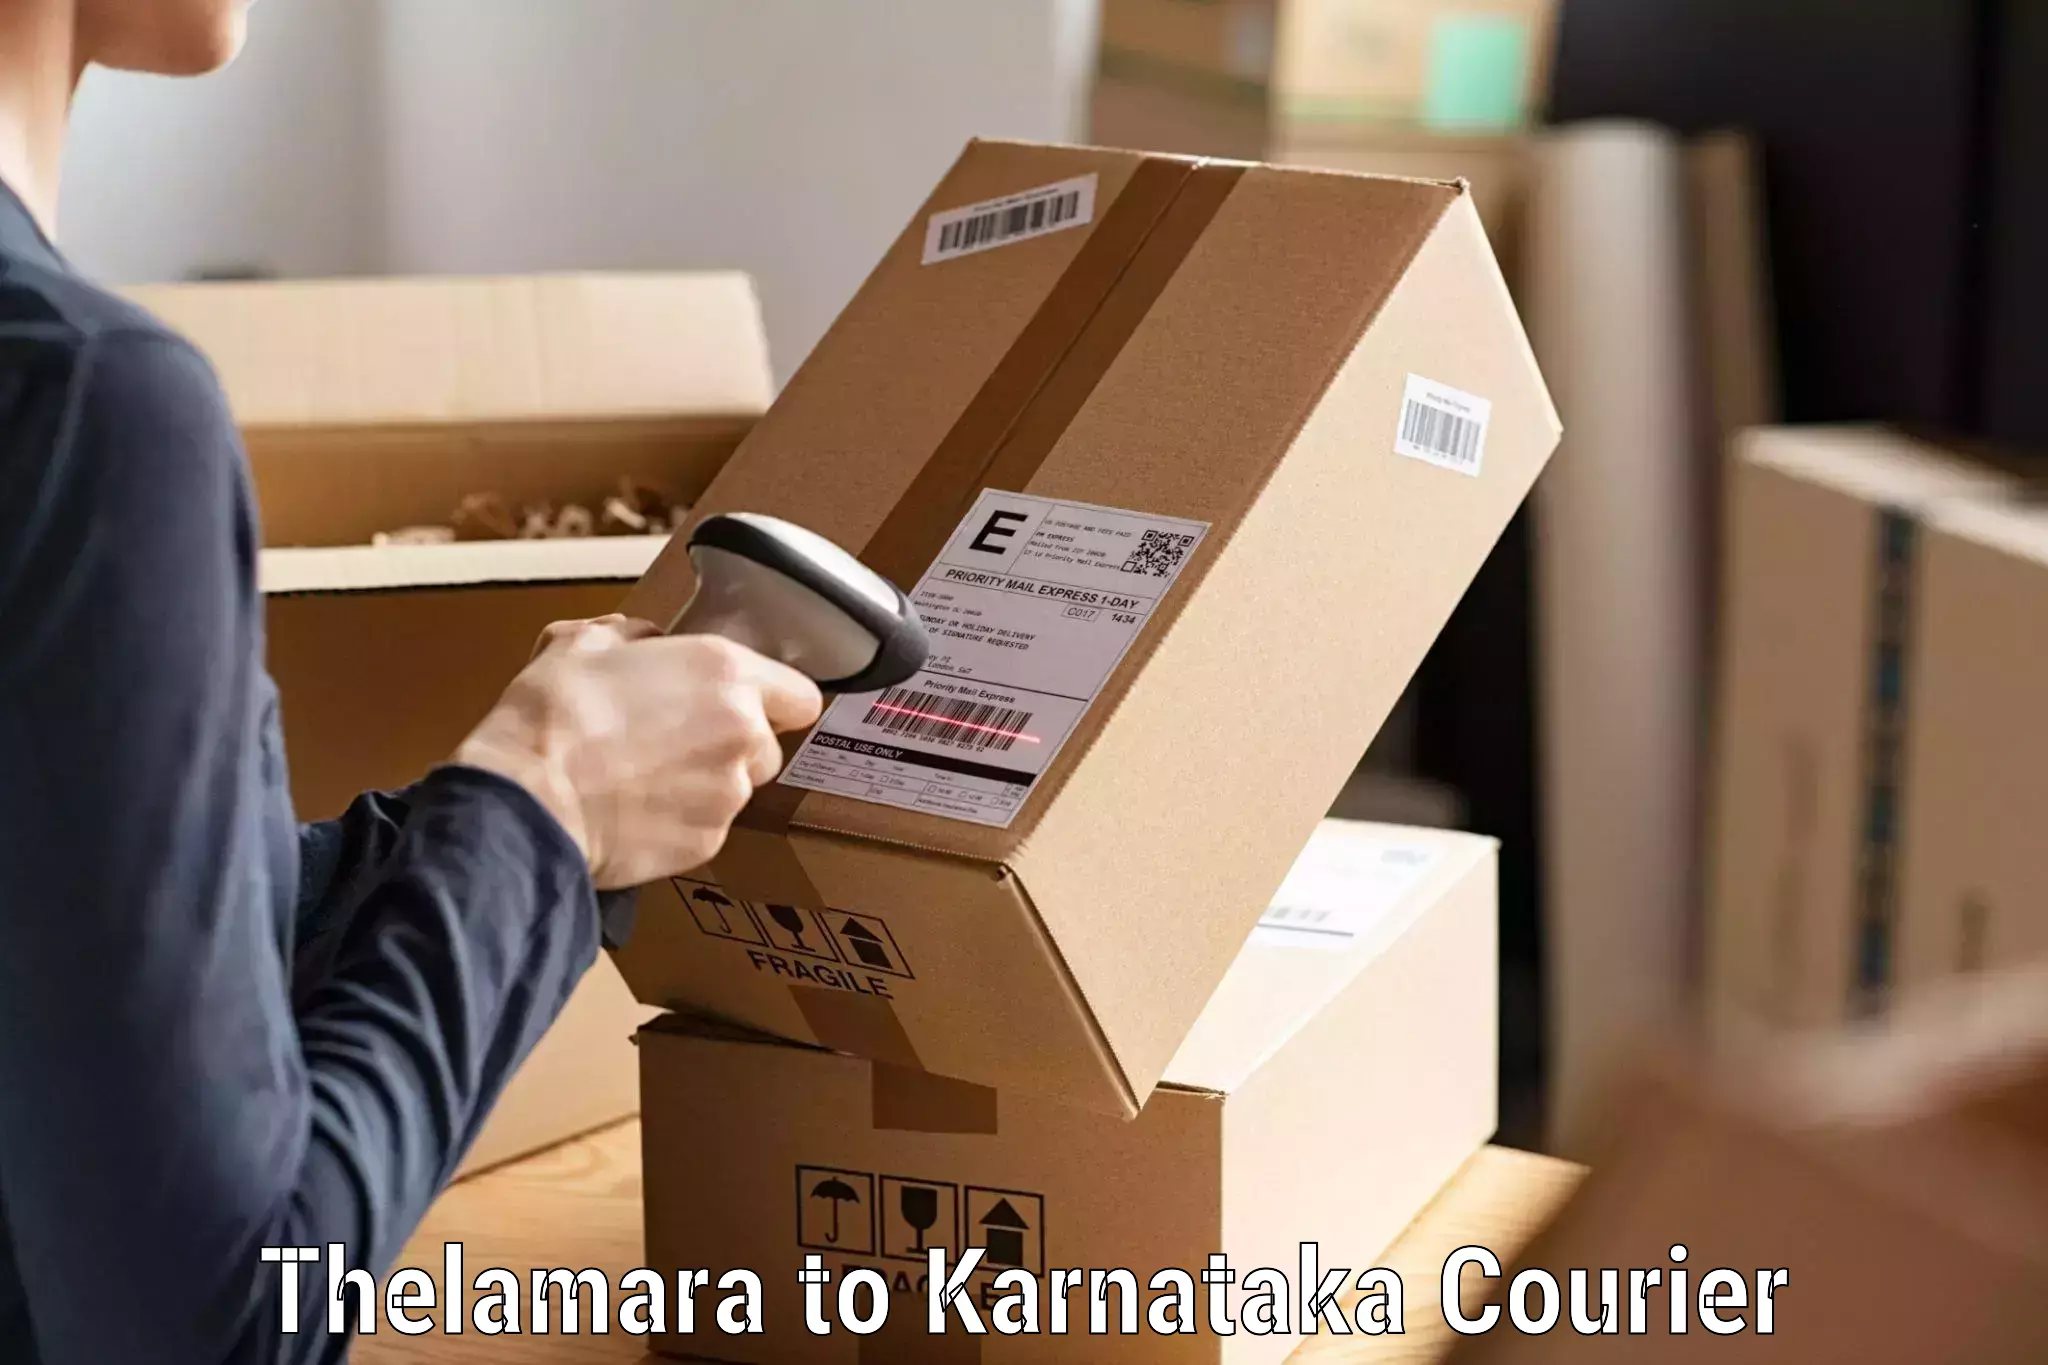 Efficient package consolidation Thelamara to yedrami